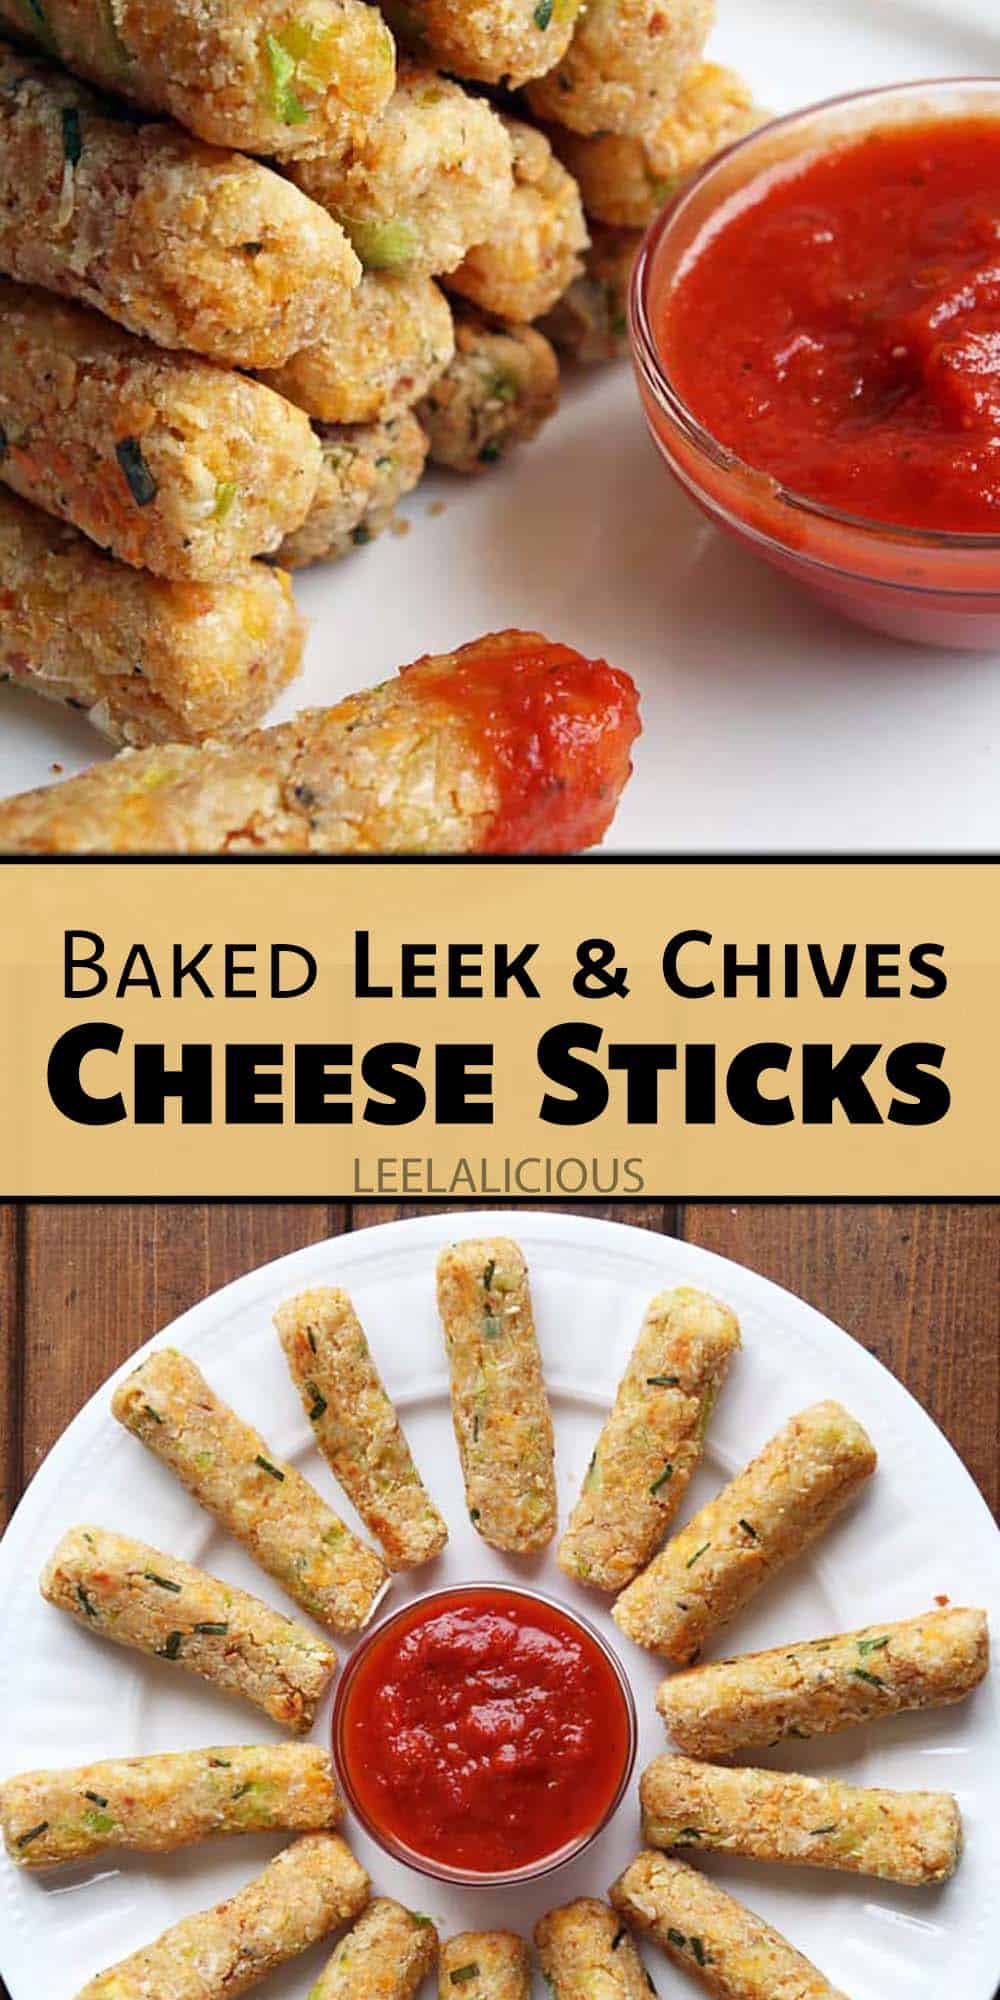 Baked Leek & Chives Cheese Sticks